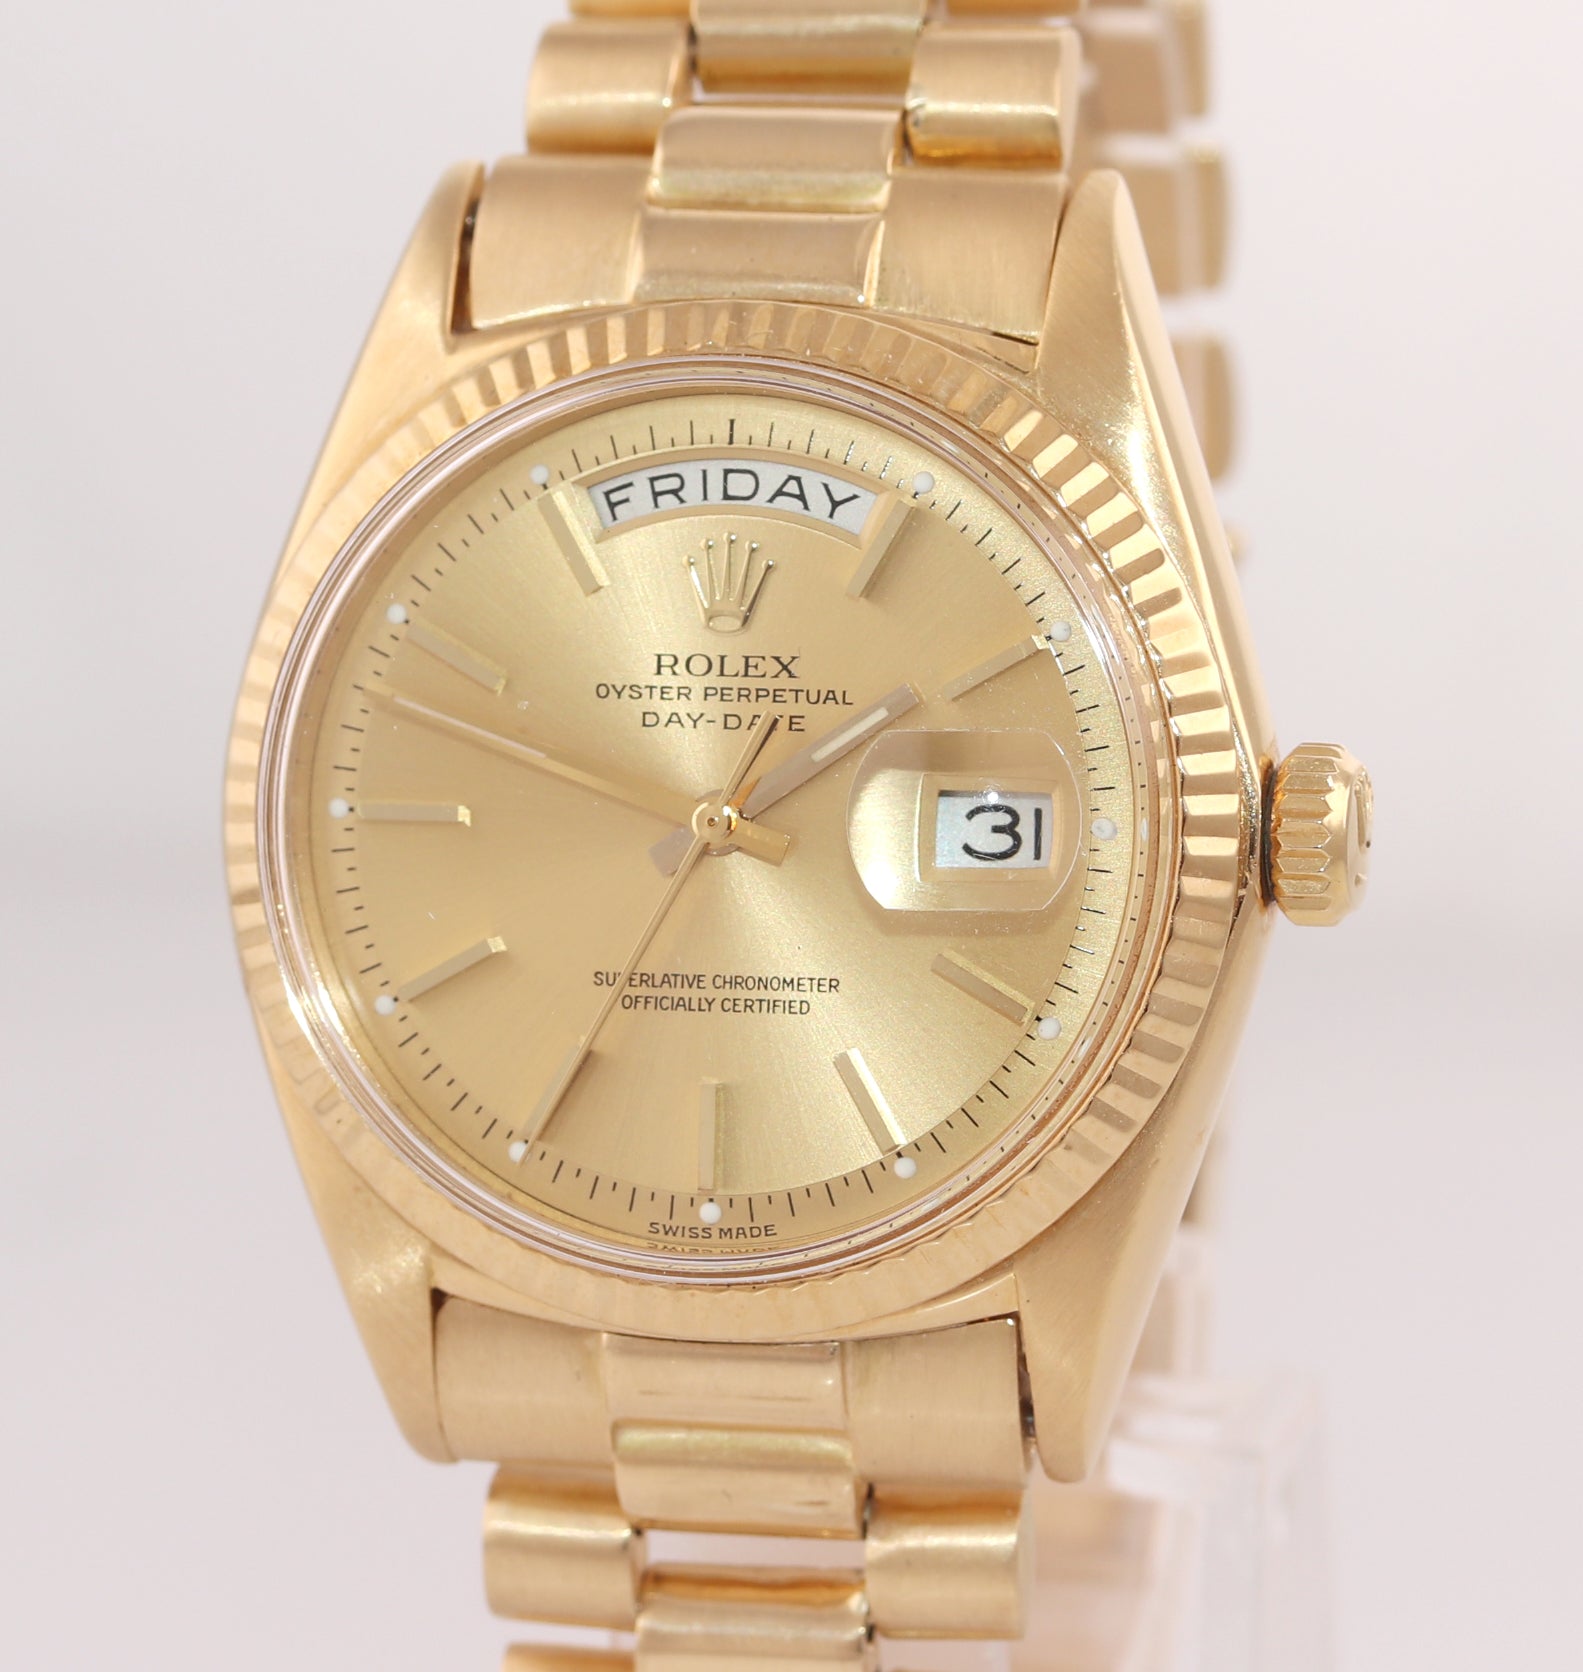 Rolex Day-Date President 36mm 1803 Champagne 18K Yellow Gold Band Watch 18038